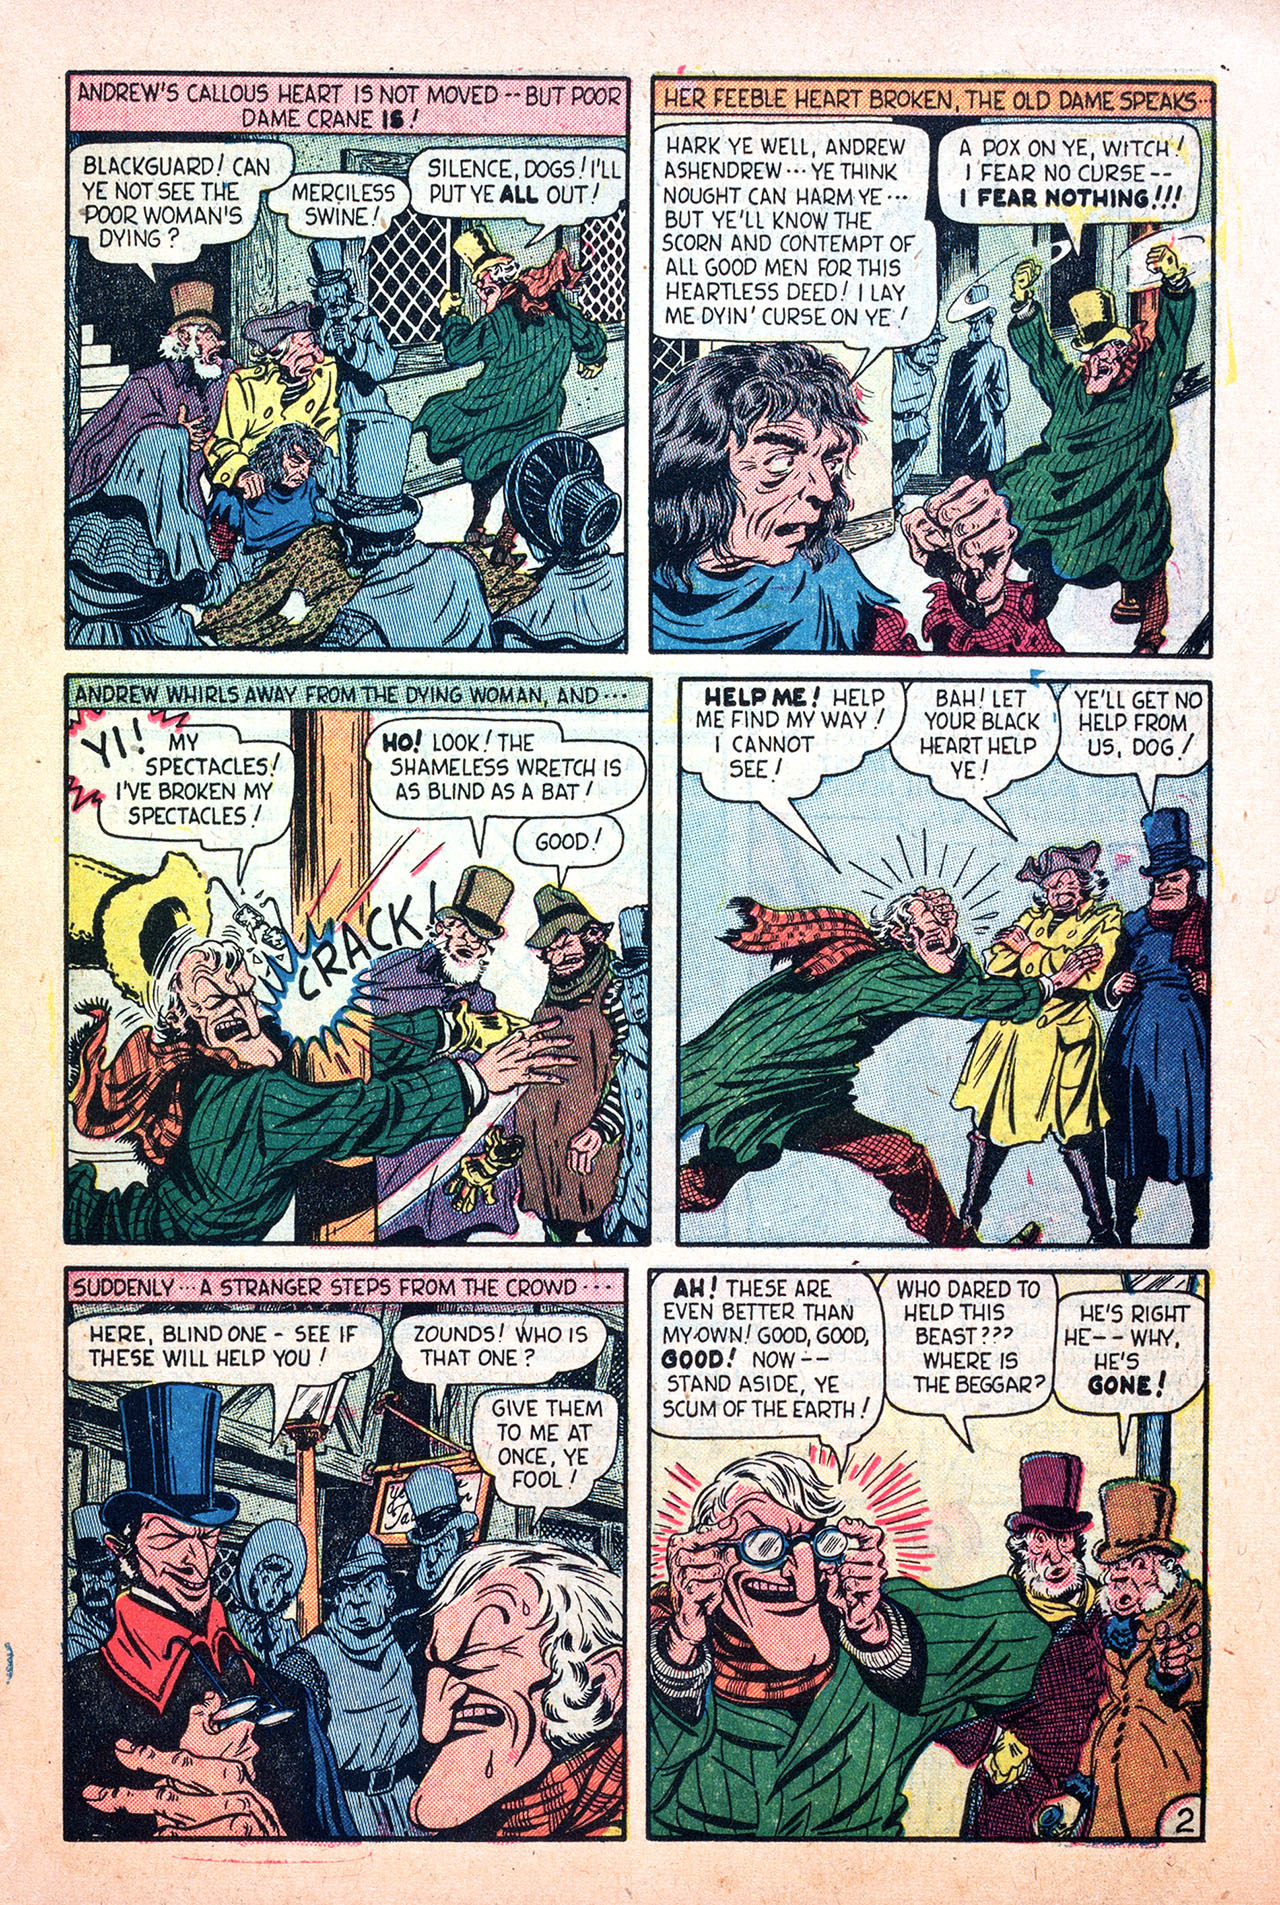 Marvel Tales (1949) 94 Page 10